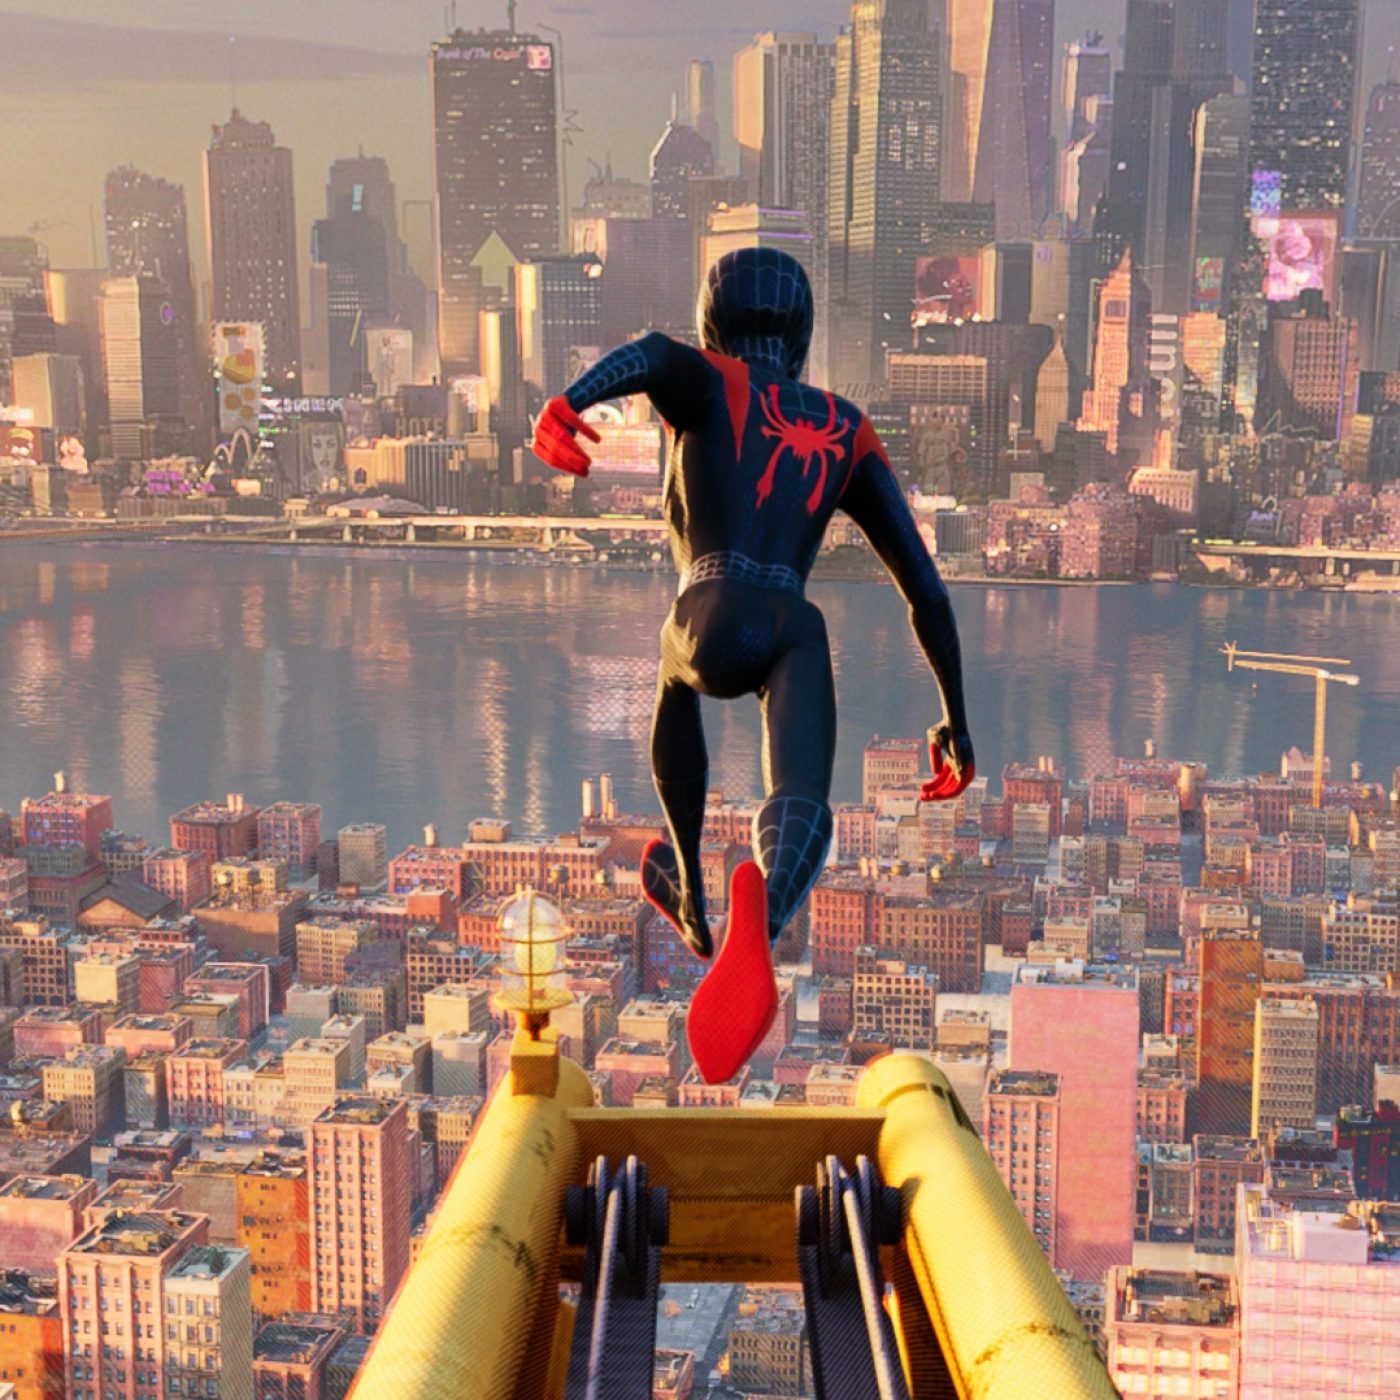 Since Sony's Spider-Man rights require them to make a Spidey movie every 5  years, what Spidey movie do you see Sony making in the future just to  retain the rights? : r/Spiderman